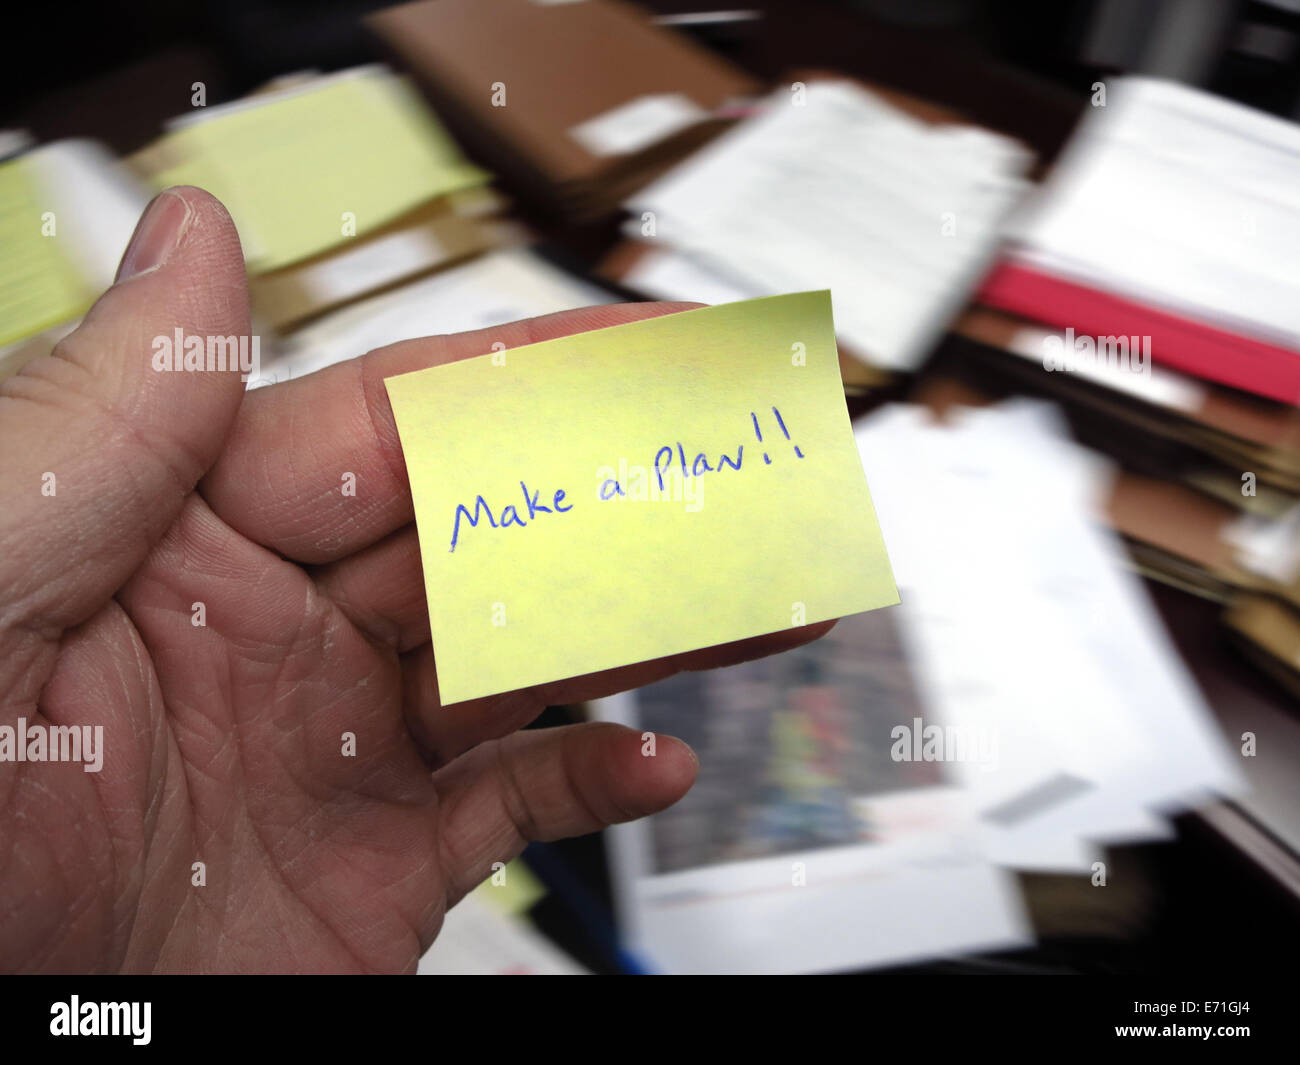 Messy office with hand holding note saying Make a Plan Stock Photo